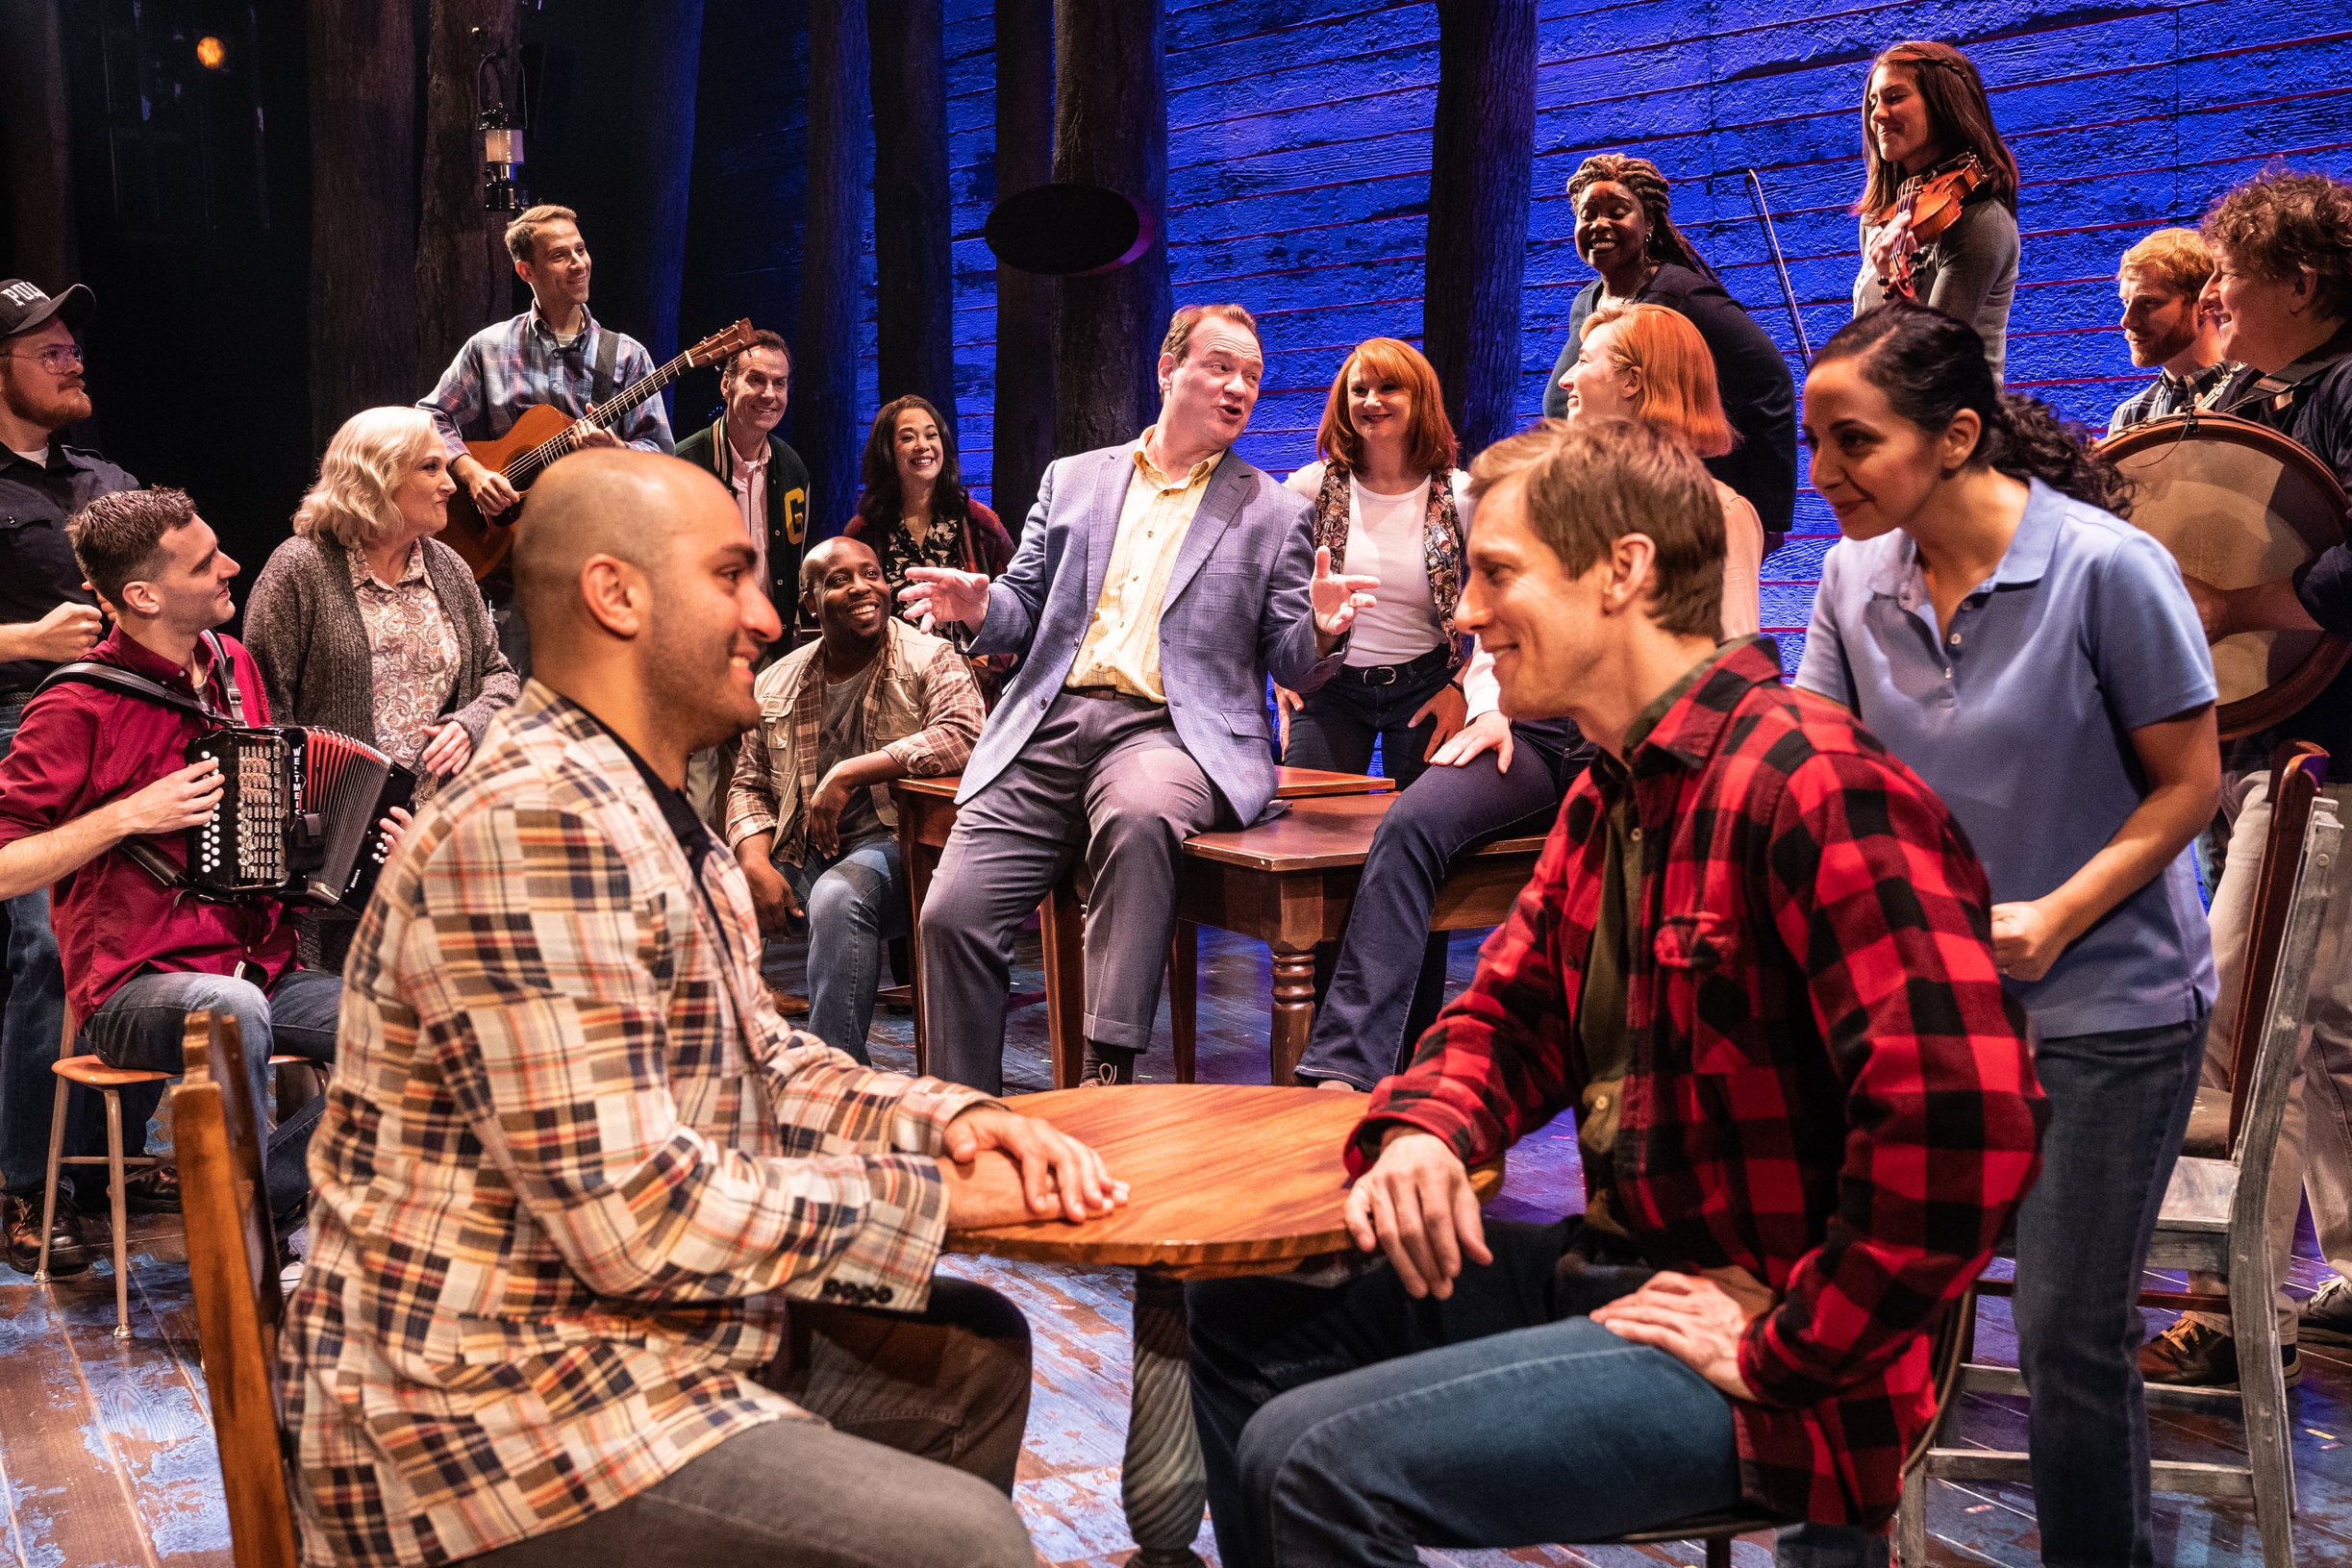 The North American tour of 'Come From Away' plays at the Kennedy Center's Eisenhower Theater through January 5, 2020. Photo by Matthew Murphy.